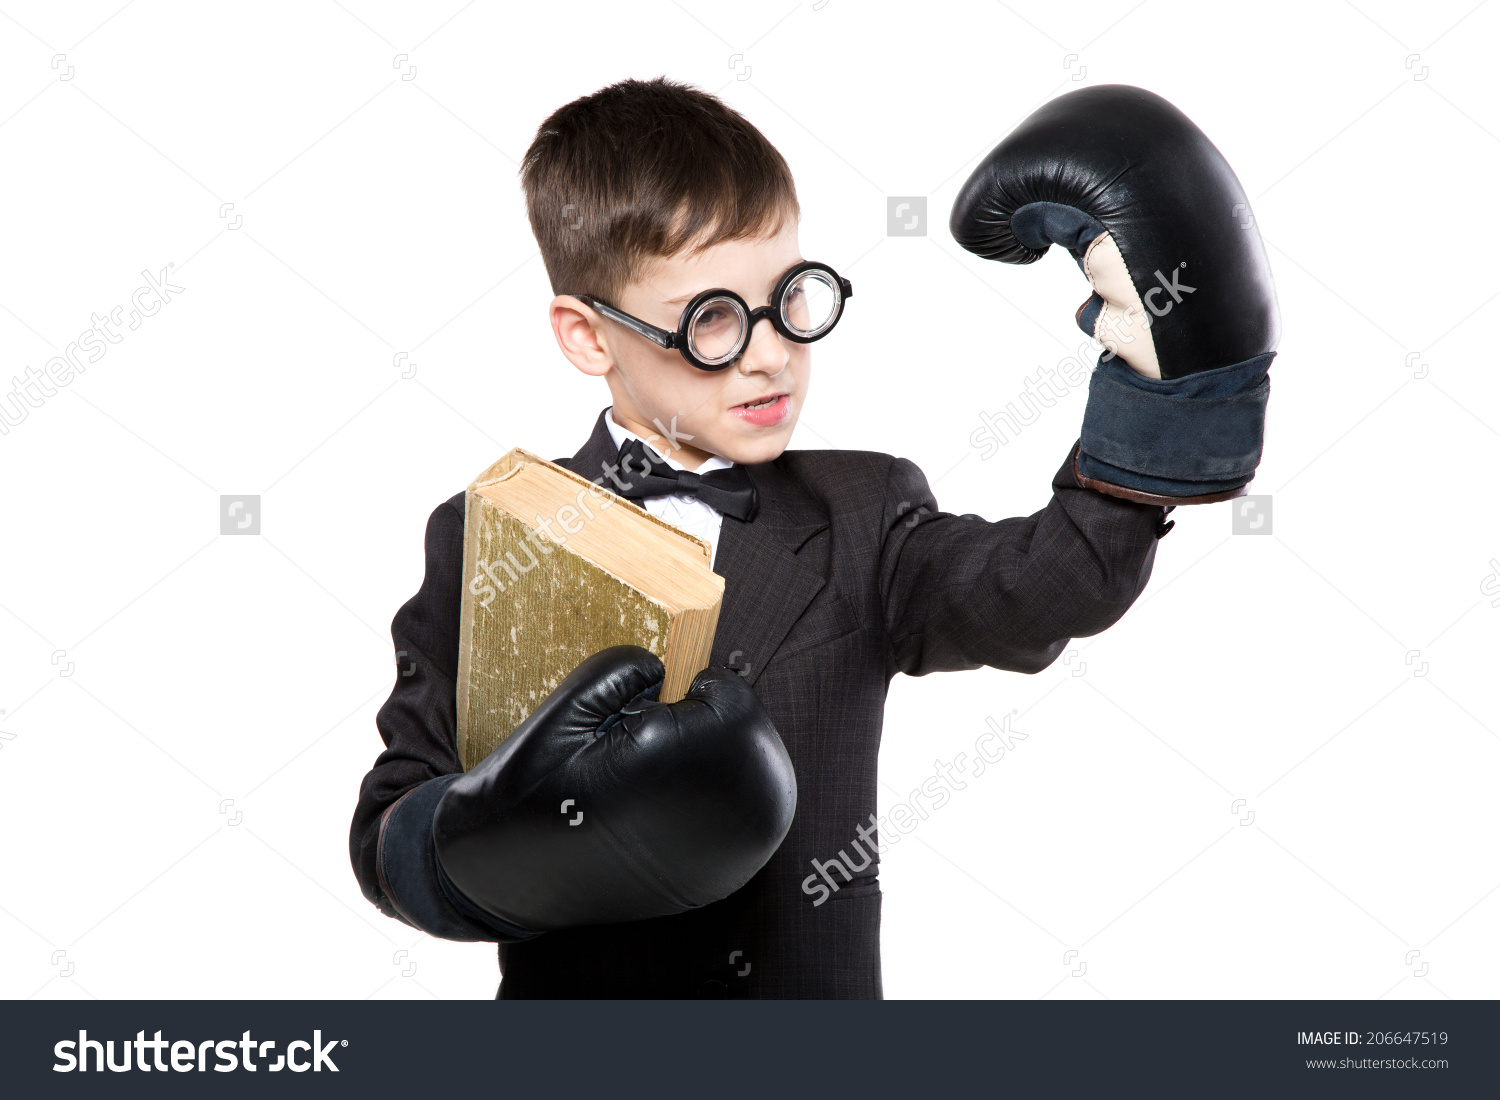 stock-photo-schoolboy-reading-a-book-in-boxing-gloves-and-suit-school-and-education-206647519